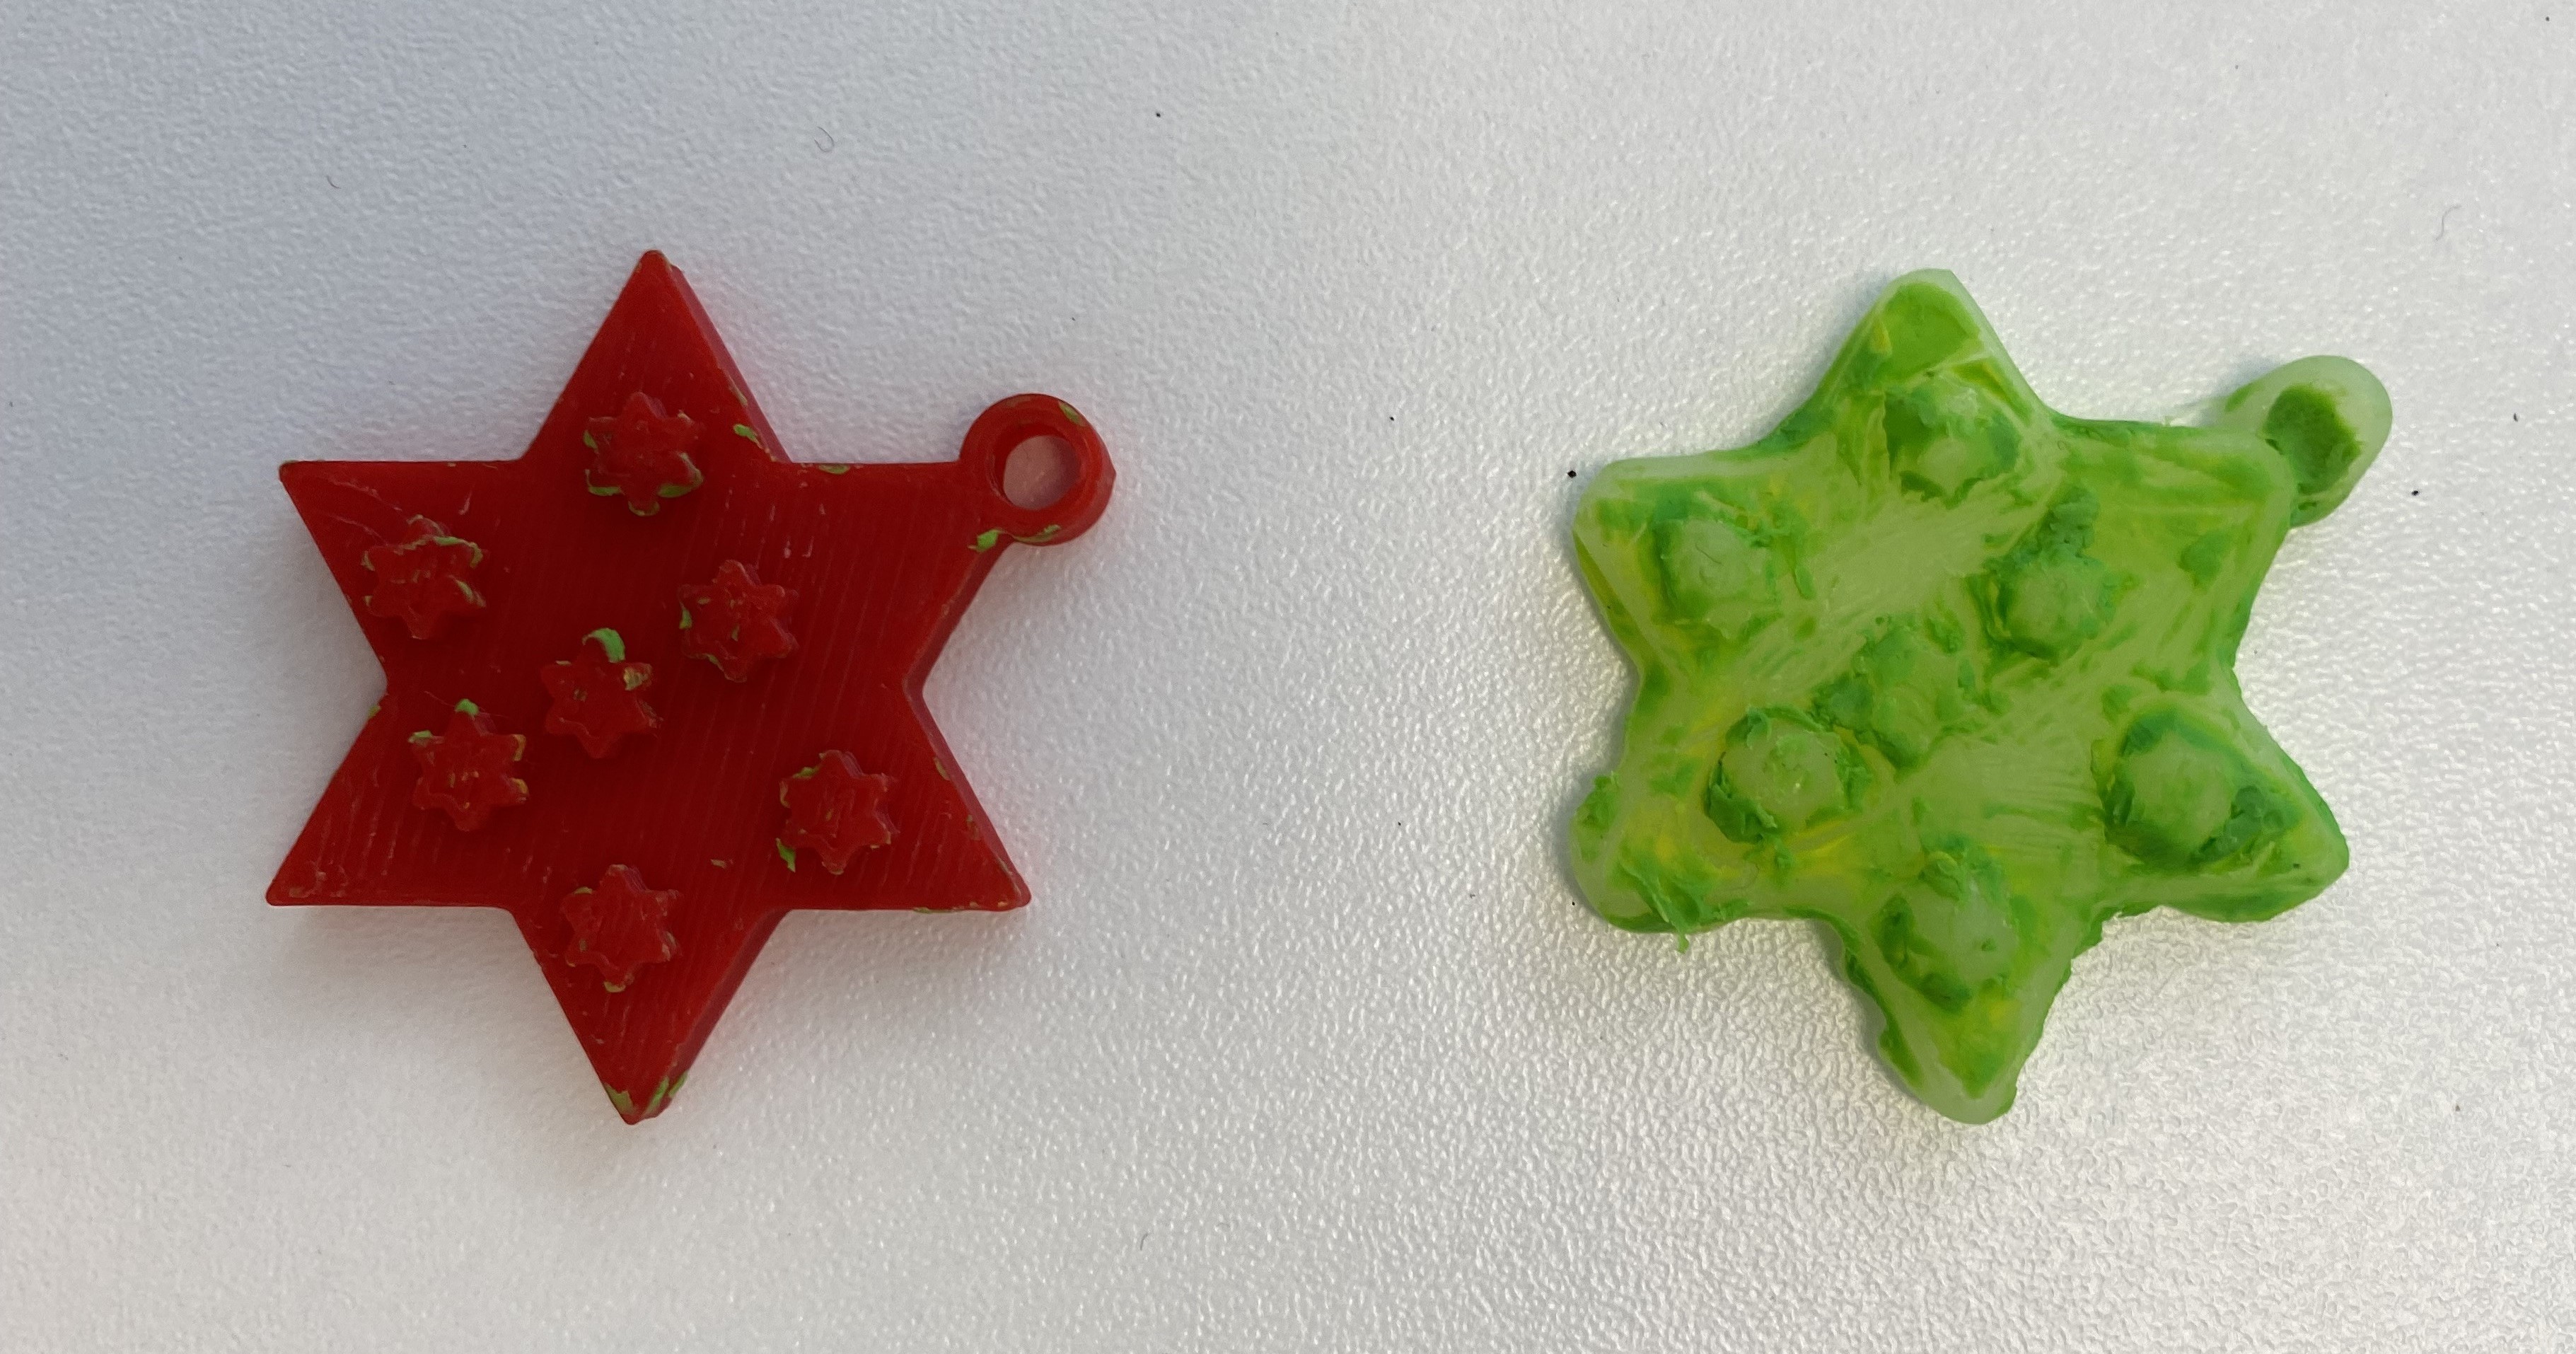 3d printed red flat star next to star made from the mould out of glue